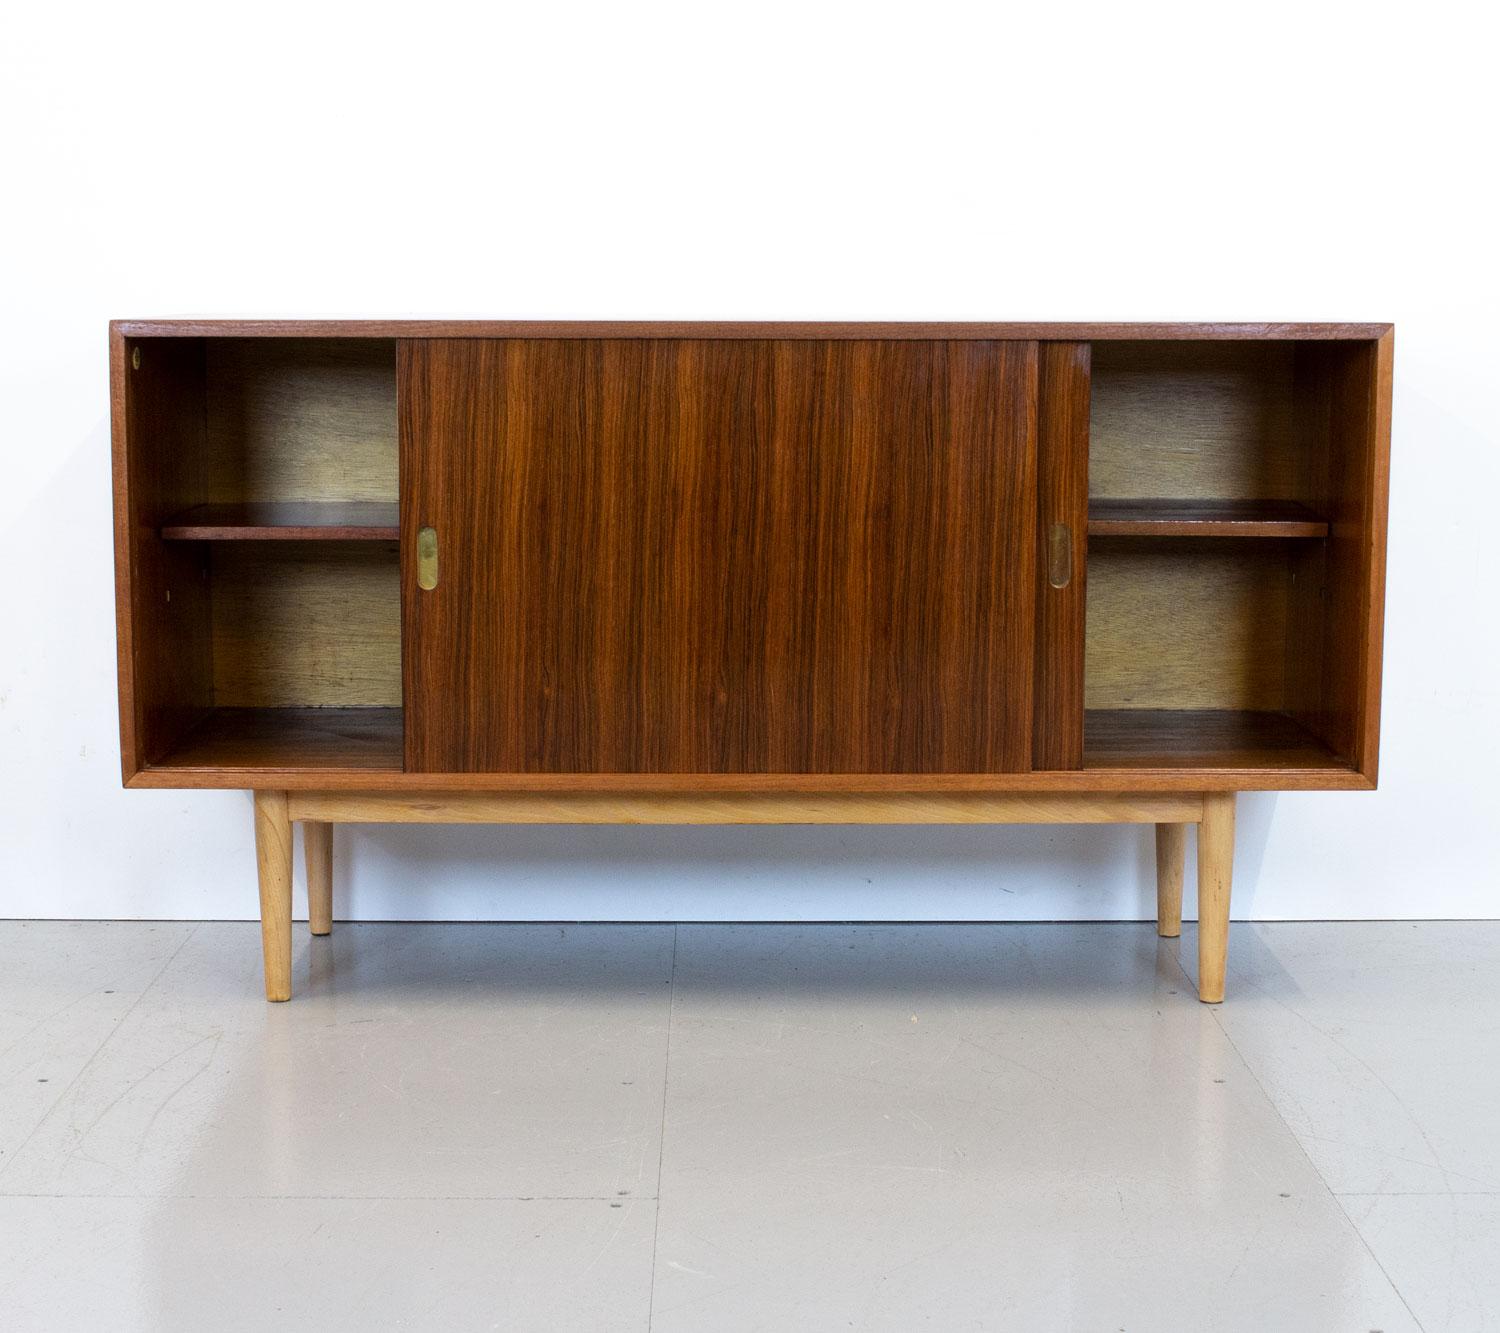 Varnished Interplan Unit 'K' Rosewood Sideboard by Robin Day for Hille, 1950s